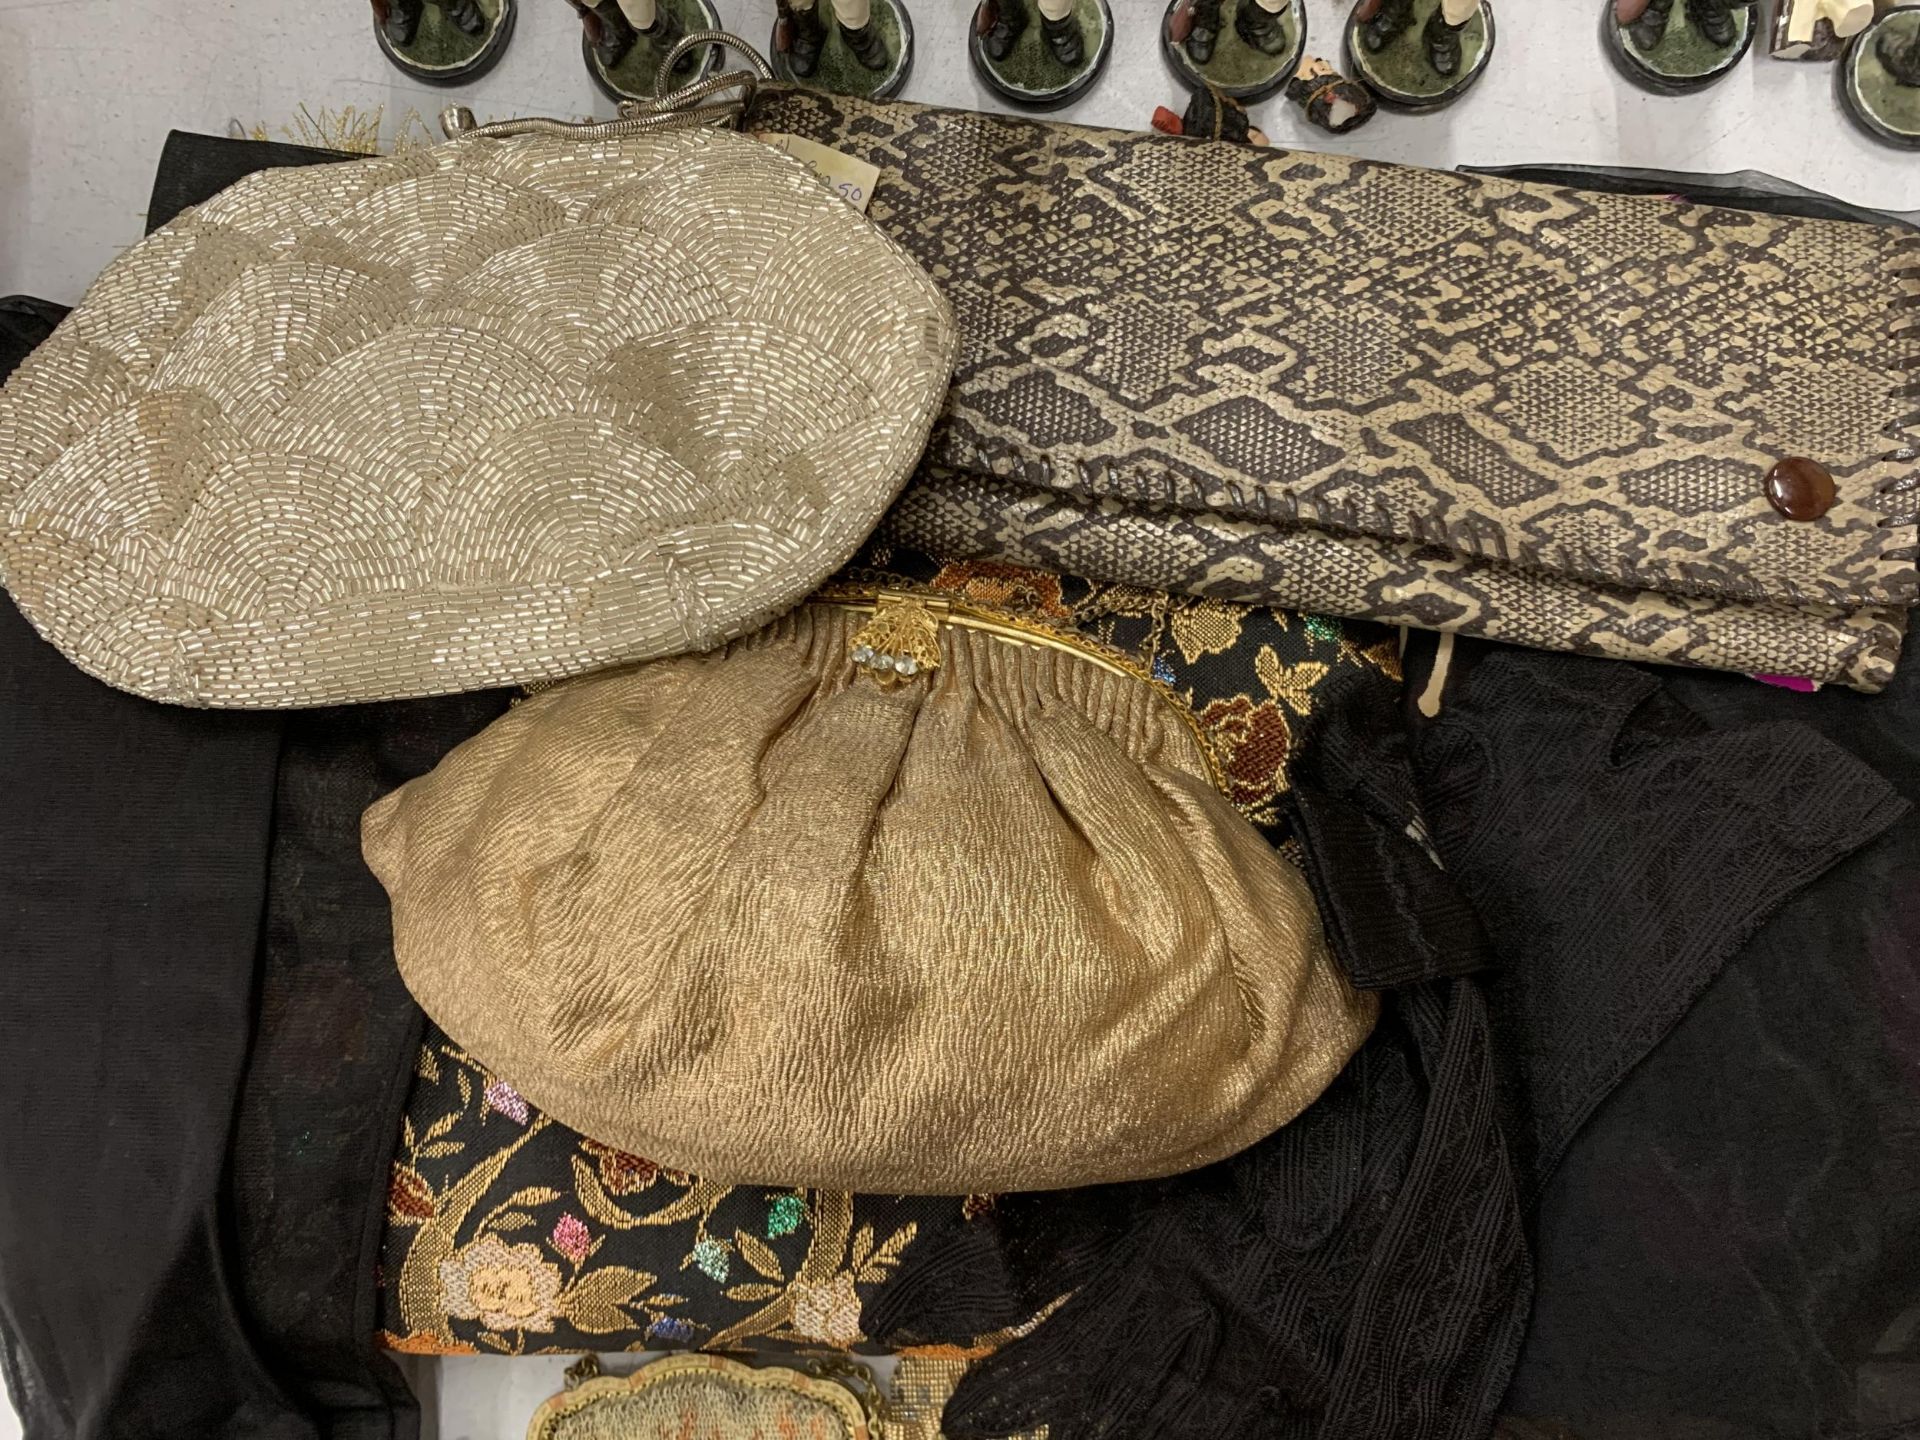 A MIXED GROUP OF VINTAGE PURSES, BAGS, TRINKET BOXES ETC - Image 2 of 5